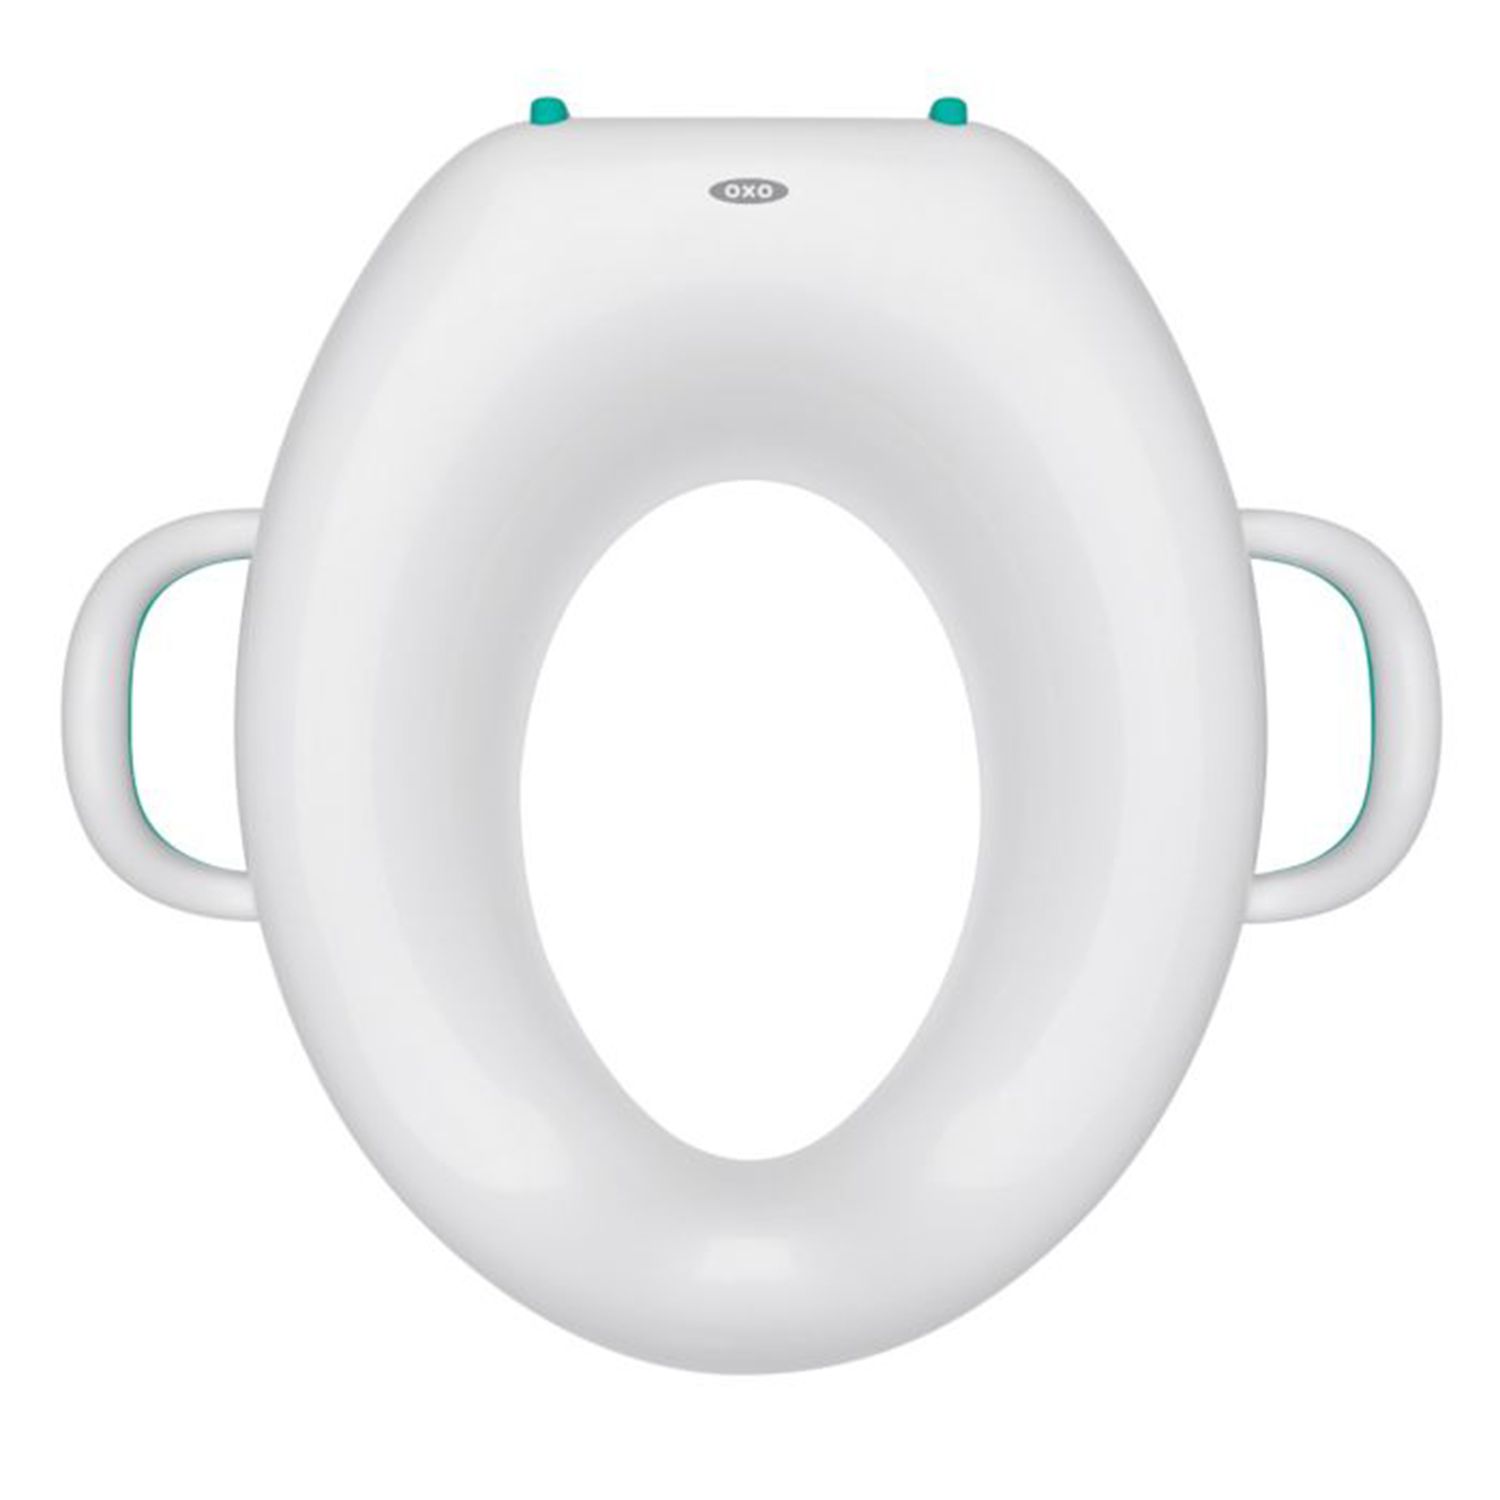 Toddler Potty Training Accessories